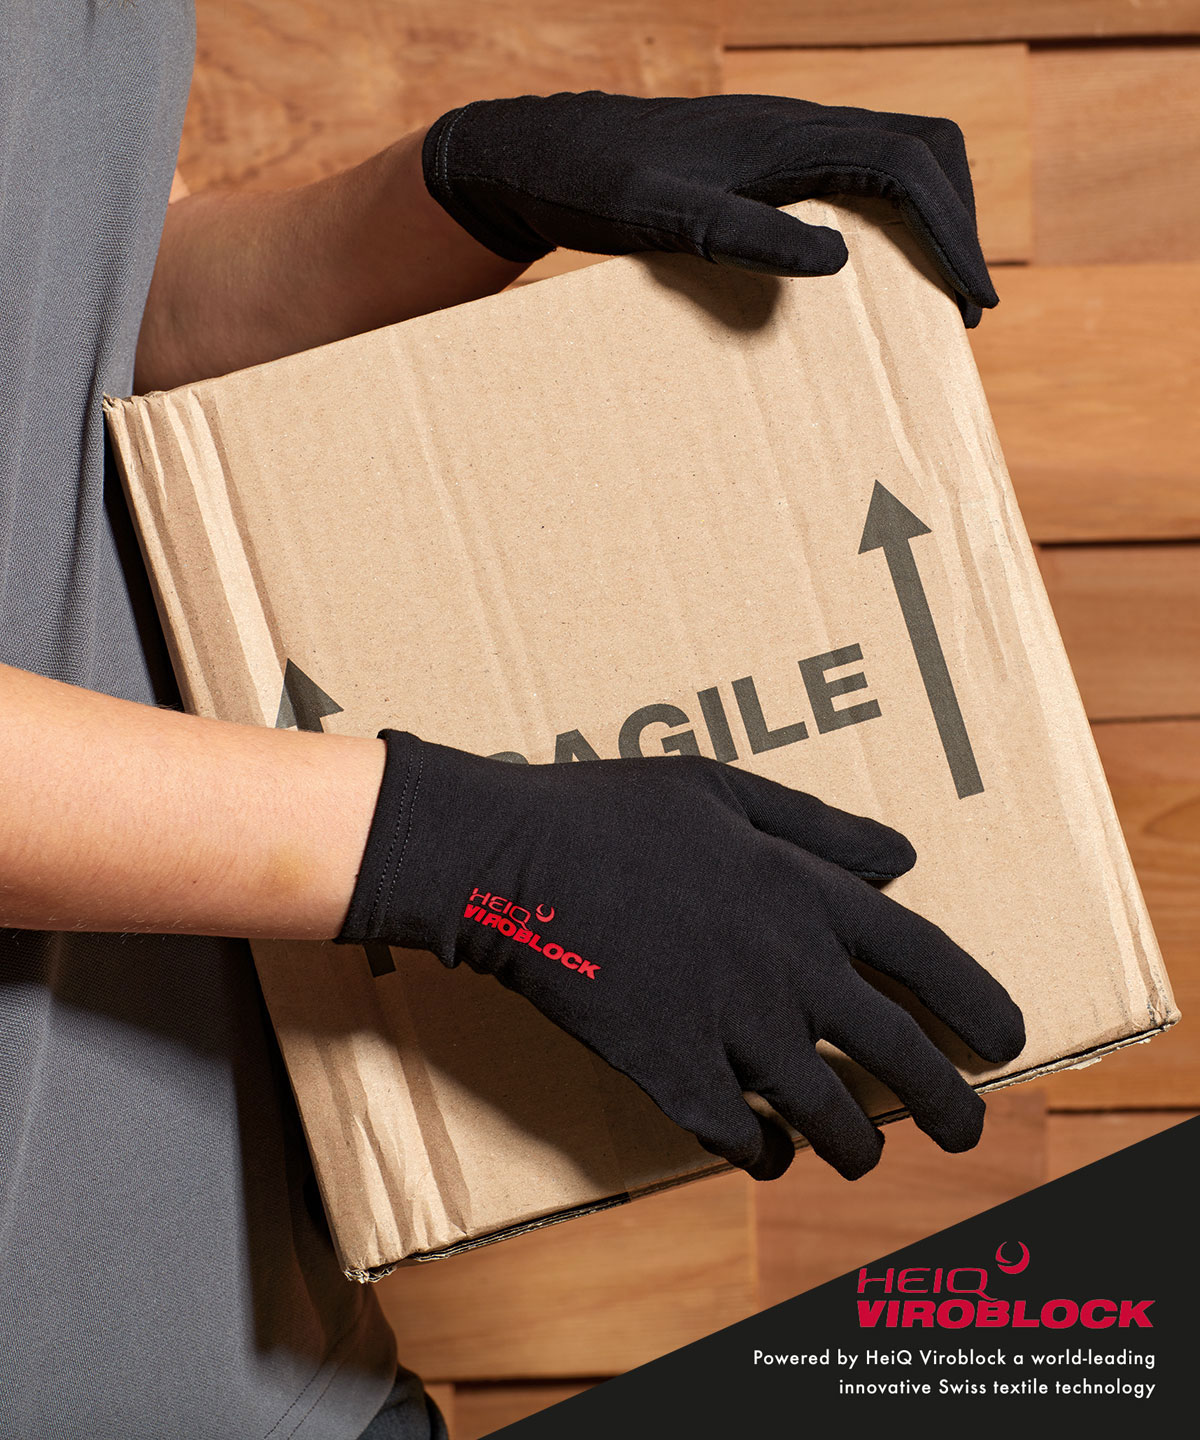 Premier touch gloves, powered by HeiQ Viroblock (one pair)